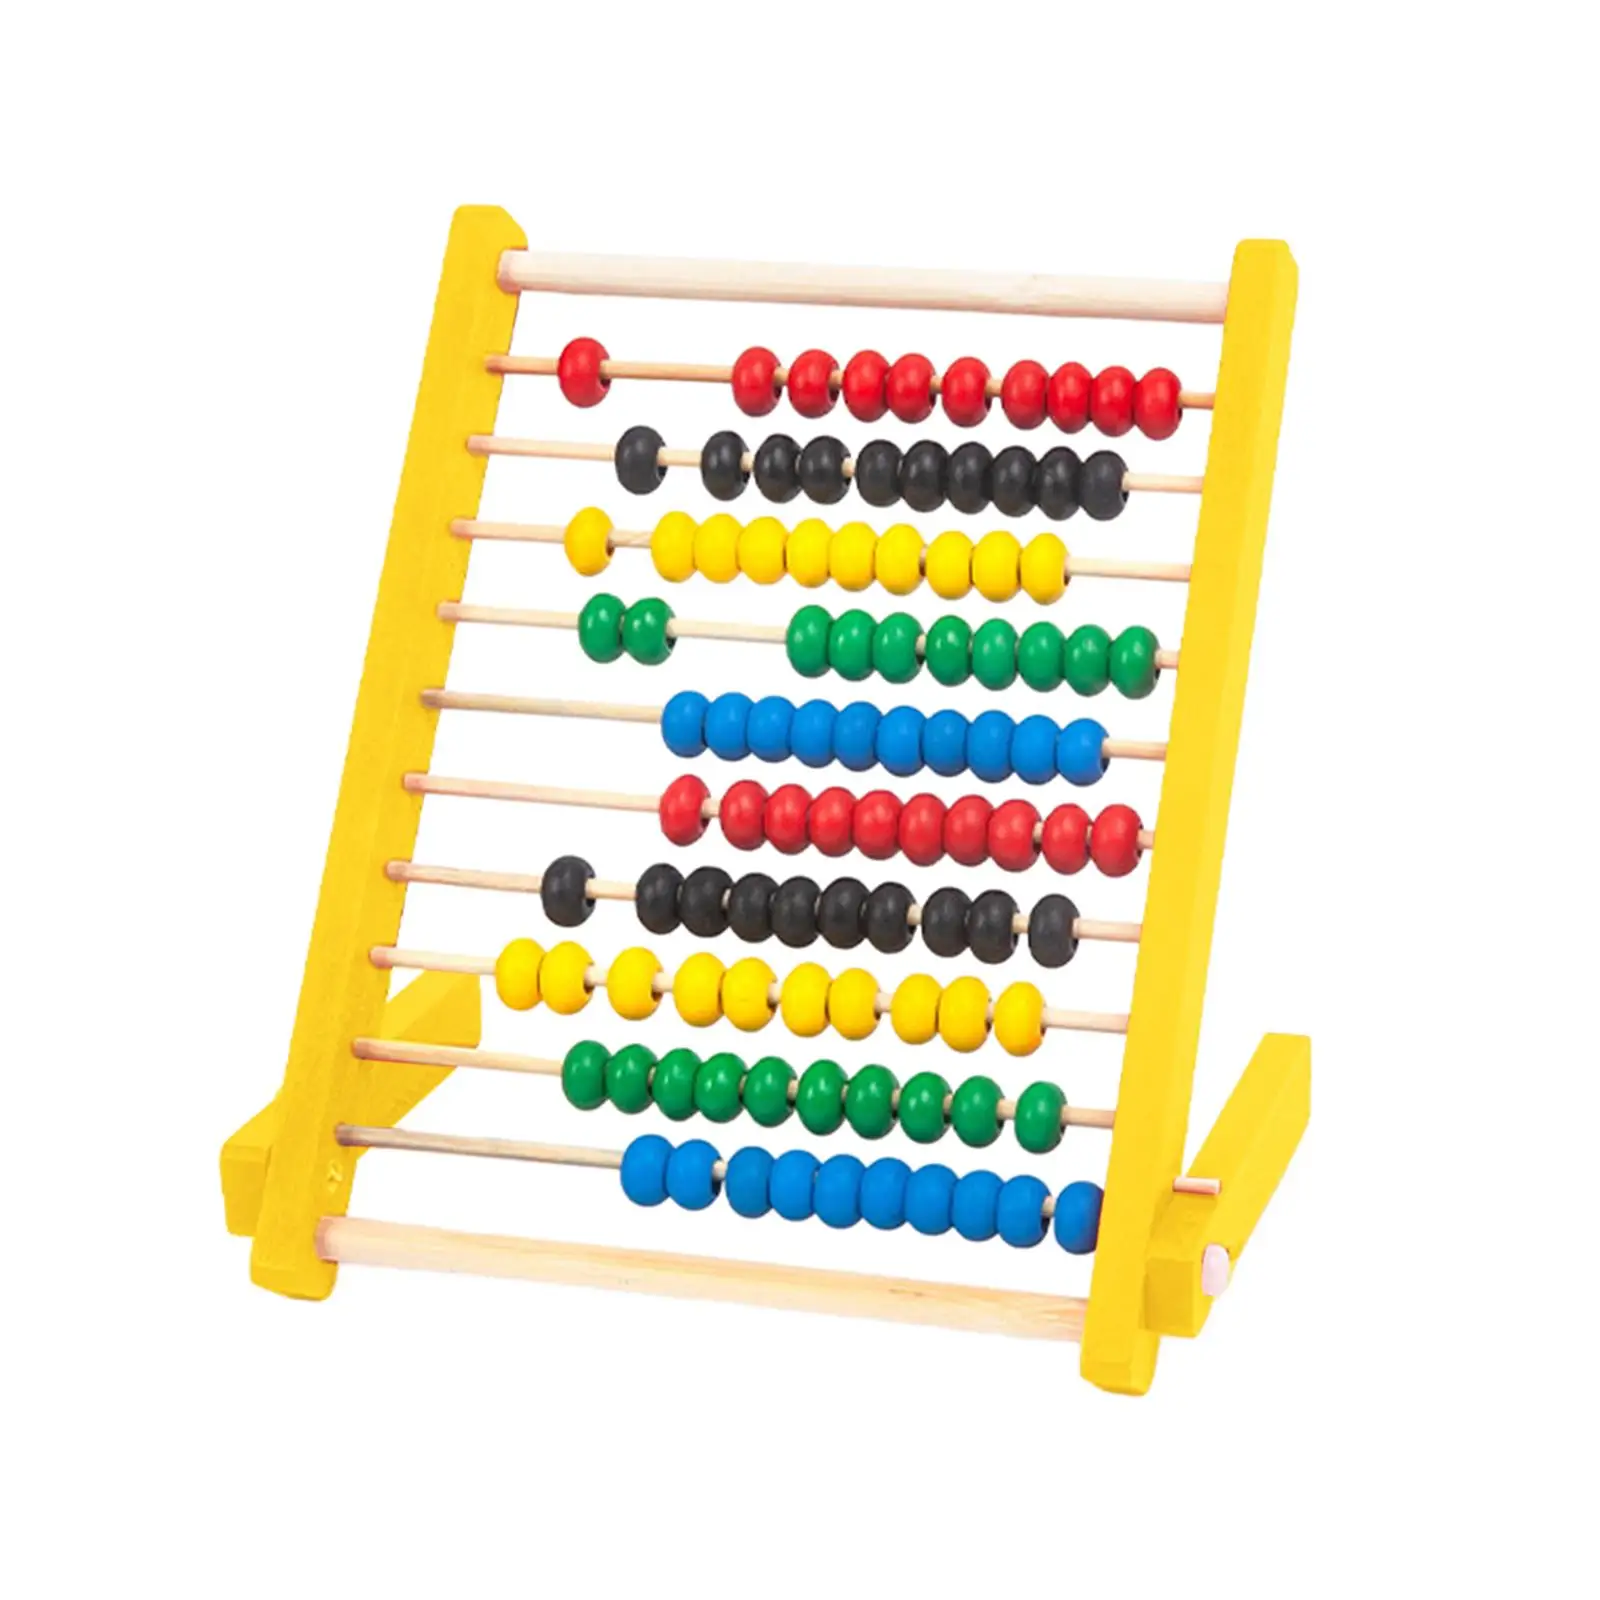 Wooden Abacus Toy Educational Tools Toddlers Mathematics Toy Beads Game for Kindergarten Boys Girls Elementary Children Kids